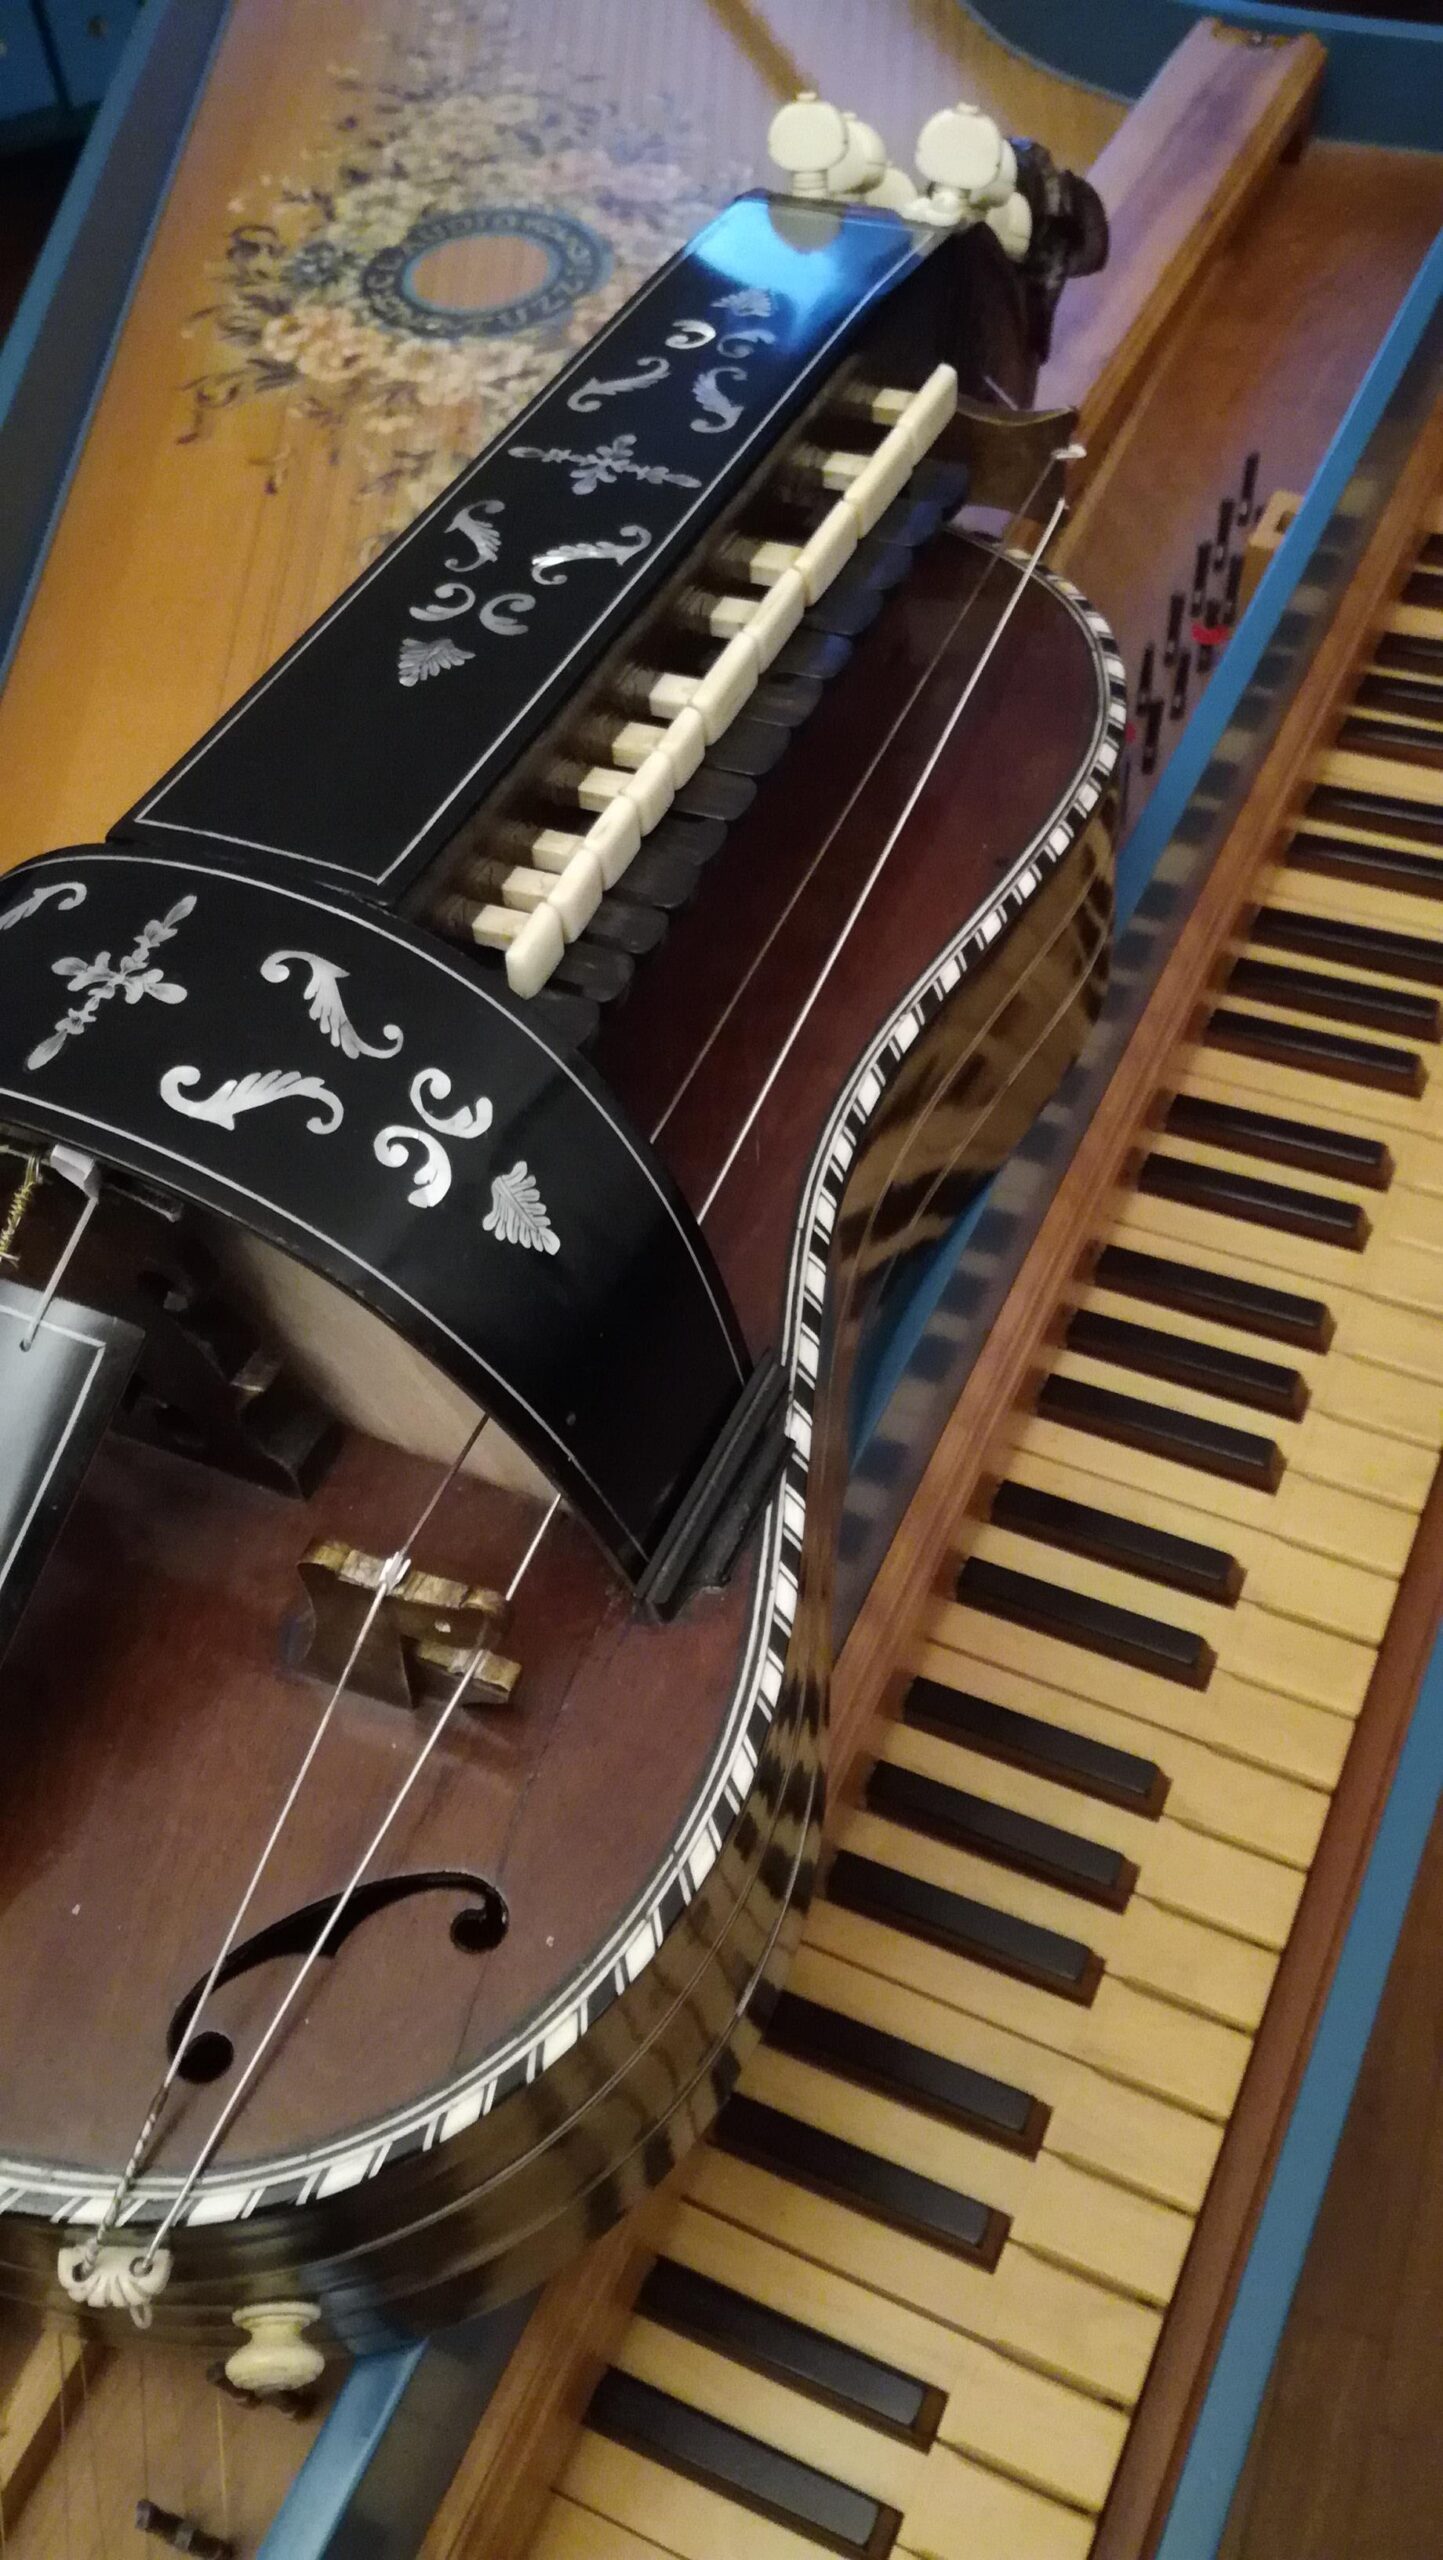 Two musical instruments: a hurdy gurdy and a harpsichord.